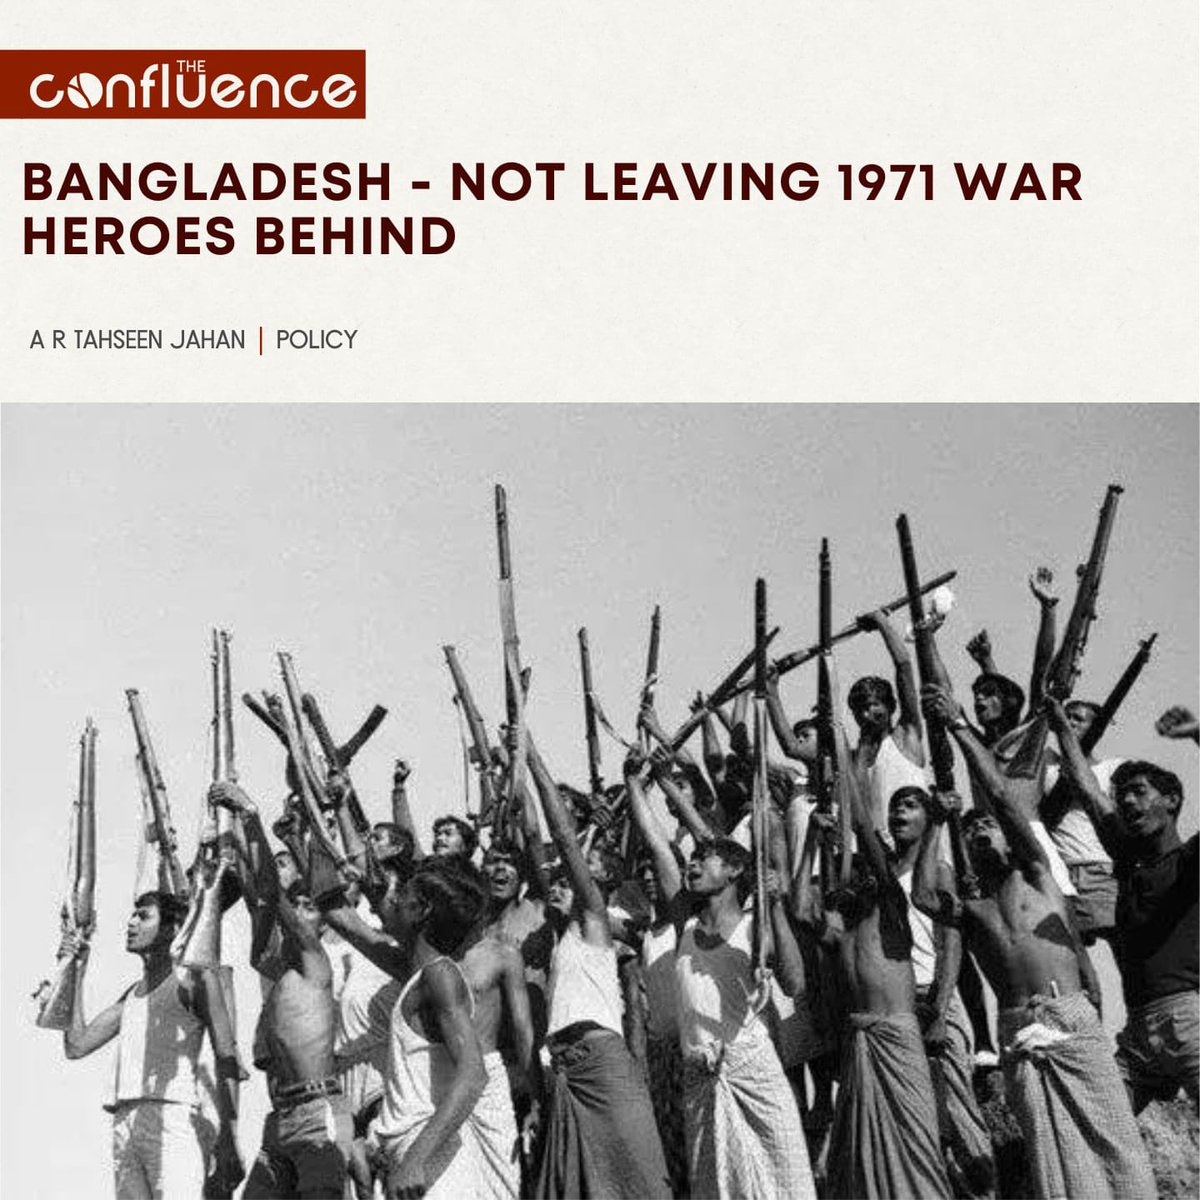 Bangladesh considers the freedom fighters of the 1971 #LiberationWar its 'greatest sons and daughters'. While many pay lip service when it comes to taking care of veterans, #Bangladesh actually walks the walk. This is demonstrated by the comprehensive benefits package which has…